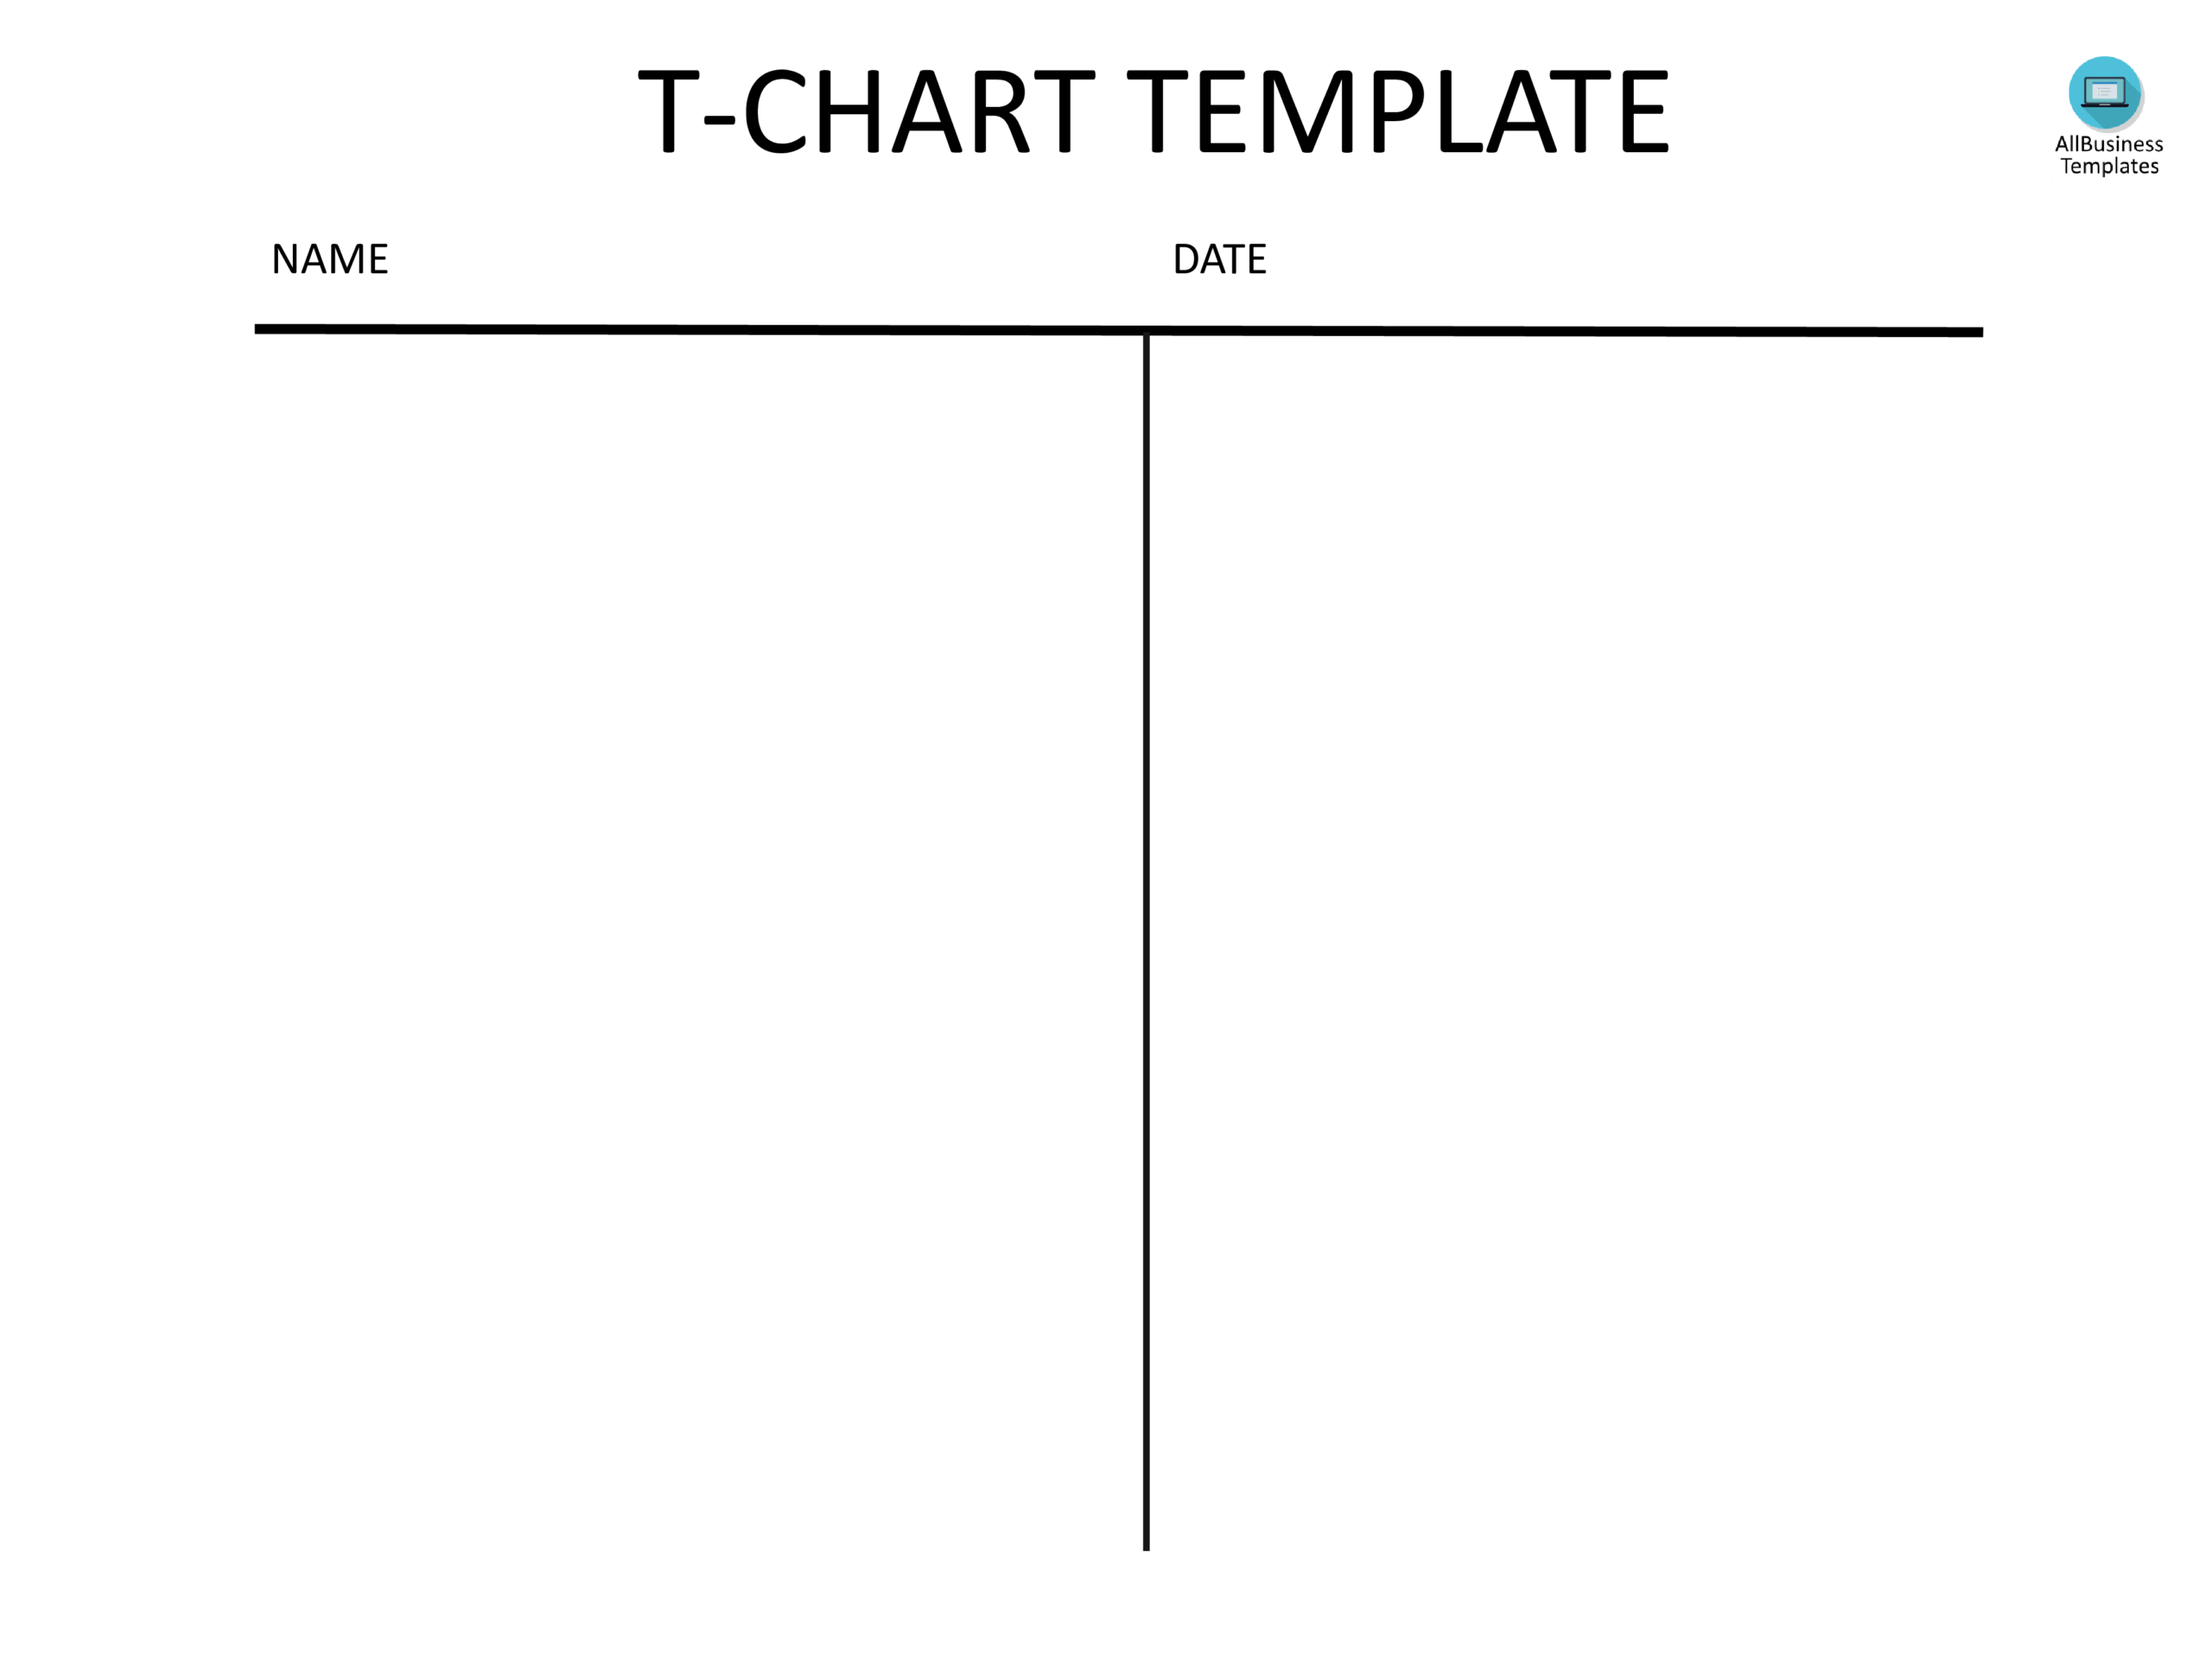 T Chart Template Pdf | Templates At Allbusinesstemplates With Regard To T Chart Template For Word